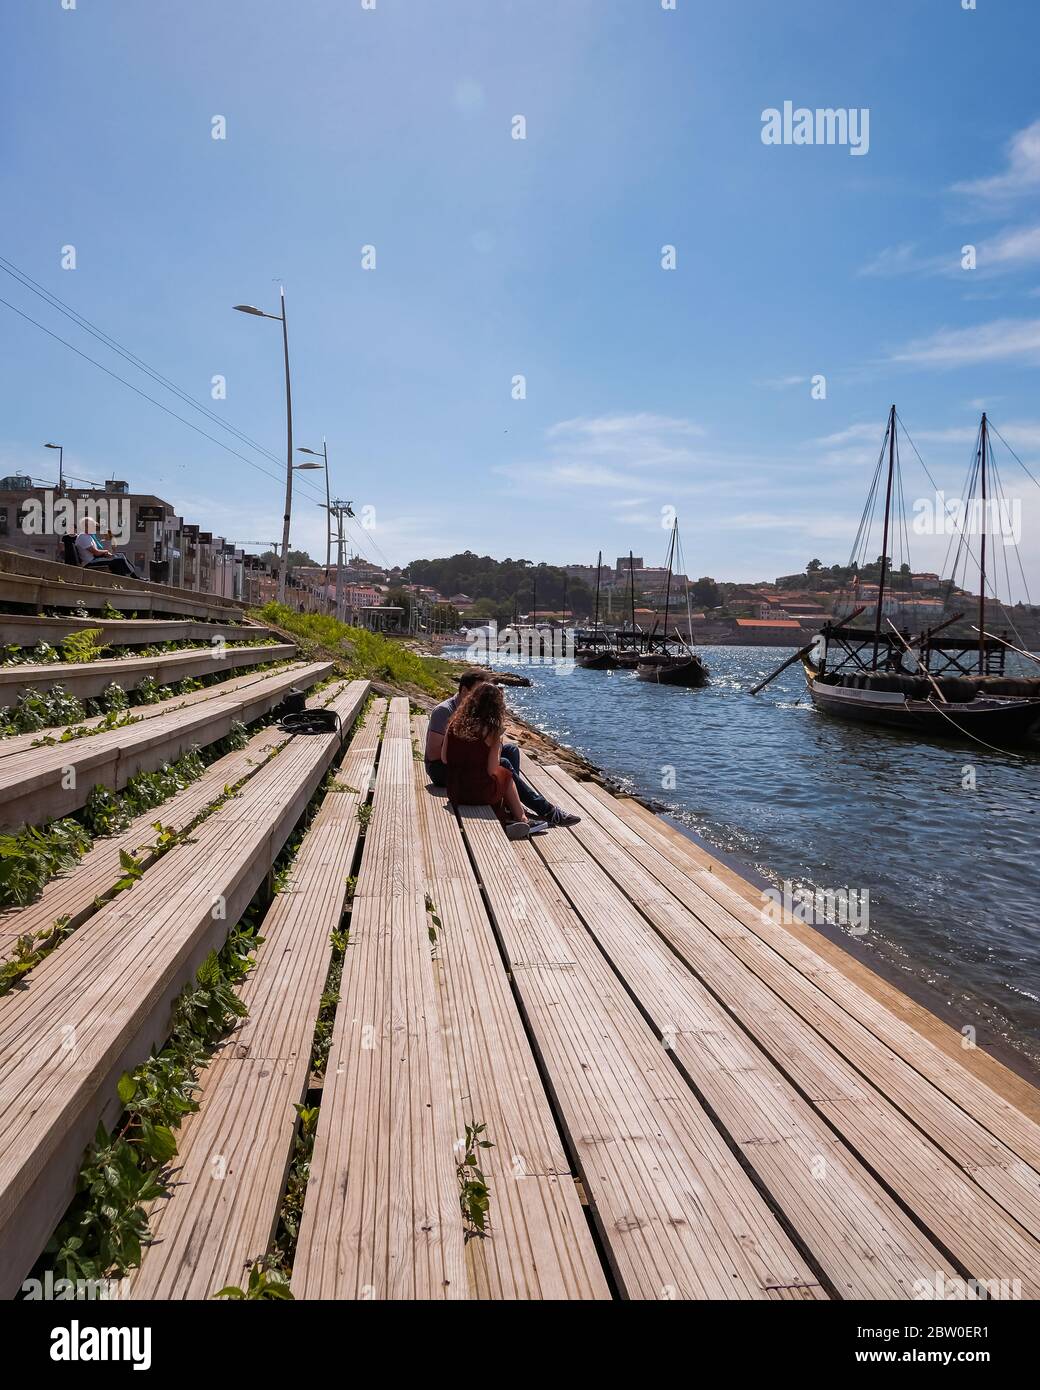 PORTO, PORTUGAL - MAY 24, 2020: A Young Couple Seated in Wooden Steps by Douro River with Traditional Rabelo Boats in a Beautiful Summer Day Stock Photo